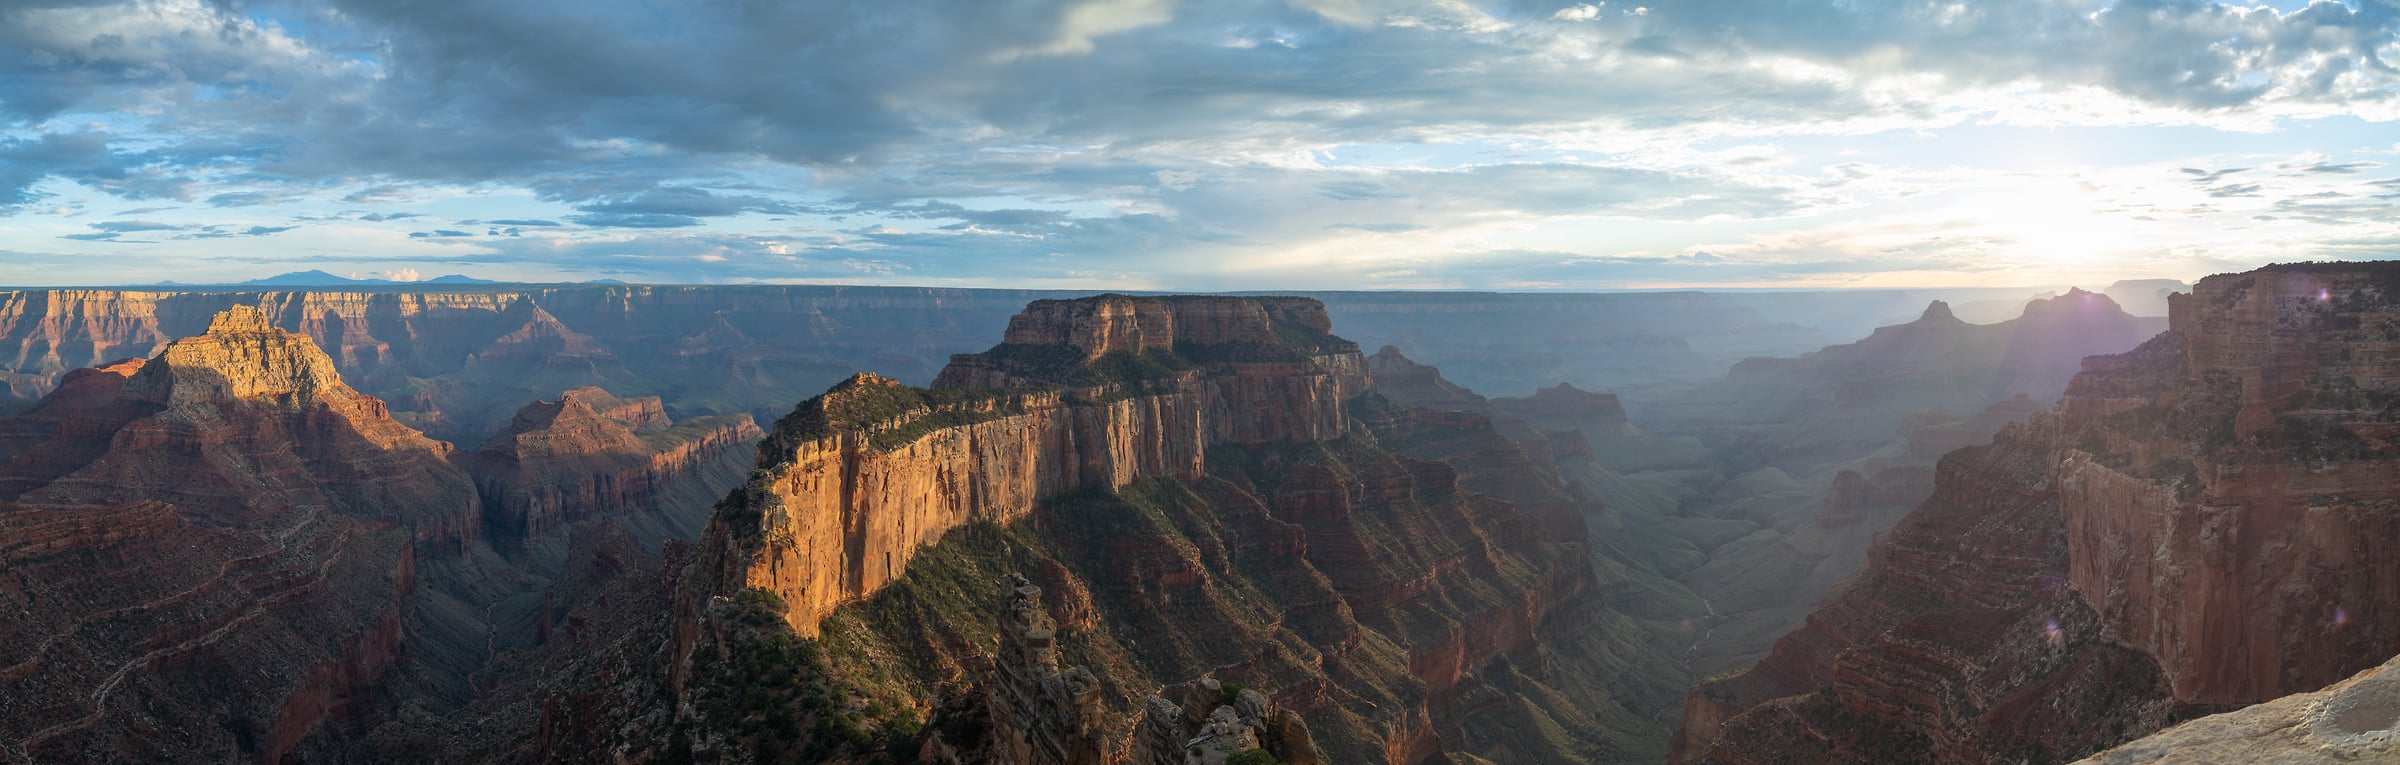 384 megapixels! A very high resolution, large-format VAST photo print of Wotons Throne in the Grand Canyon at sunset; landscape photograph created by Greg Probst in Grand Canyon National Park, Arizona